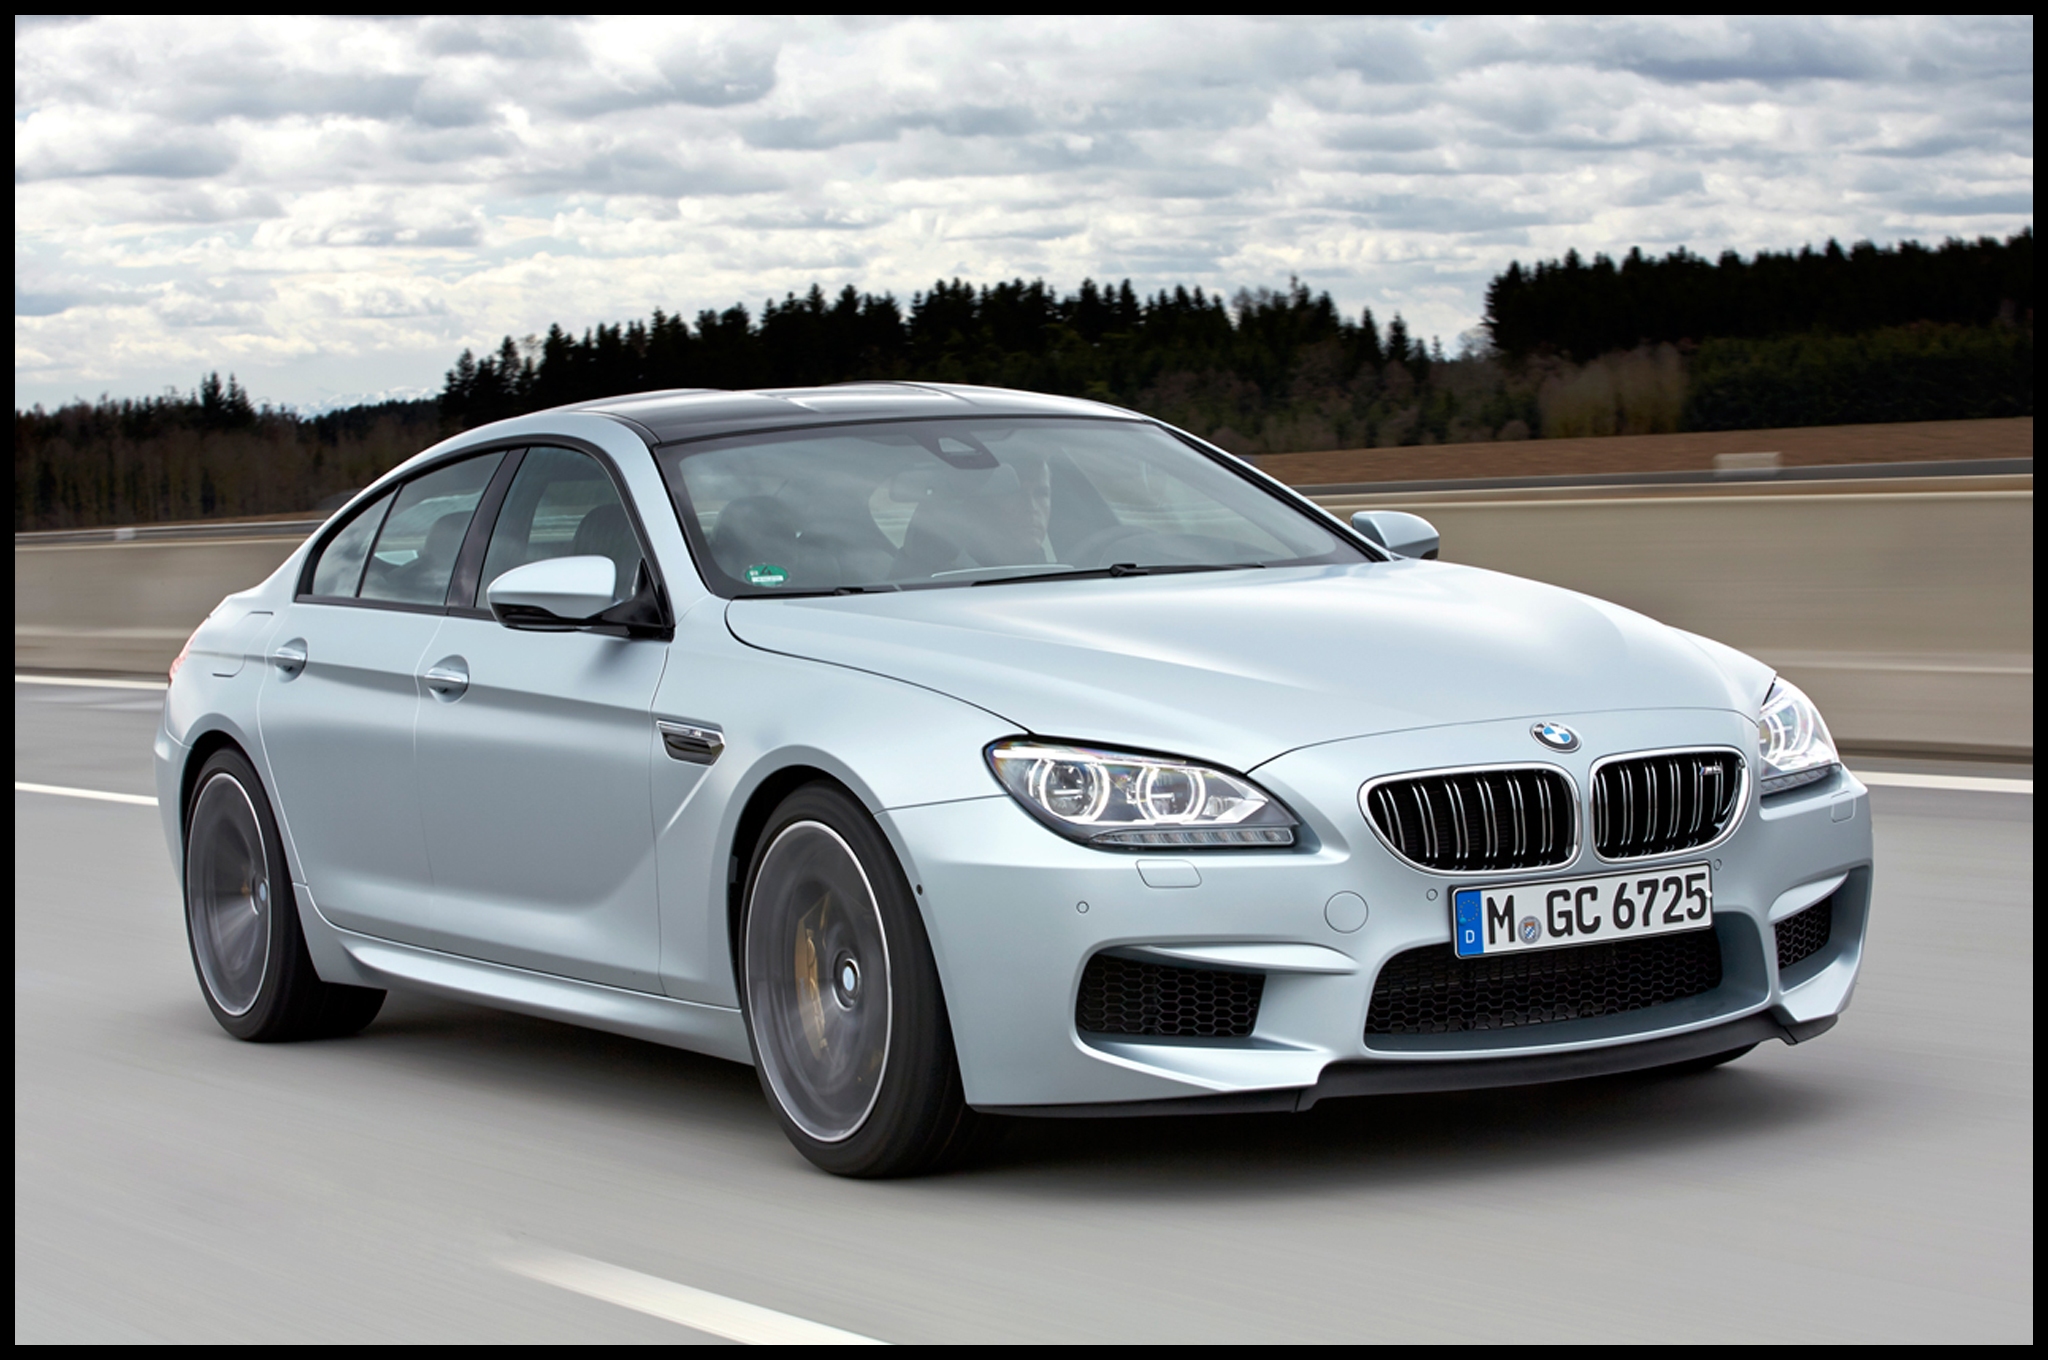 Heavy but Fast 2014 BMW M6 Gran Coupe Tested on New Ignition